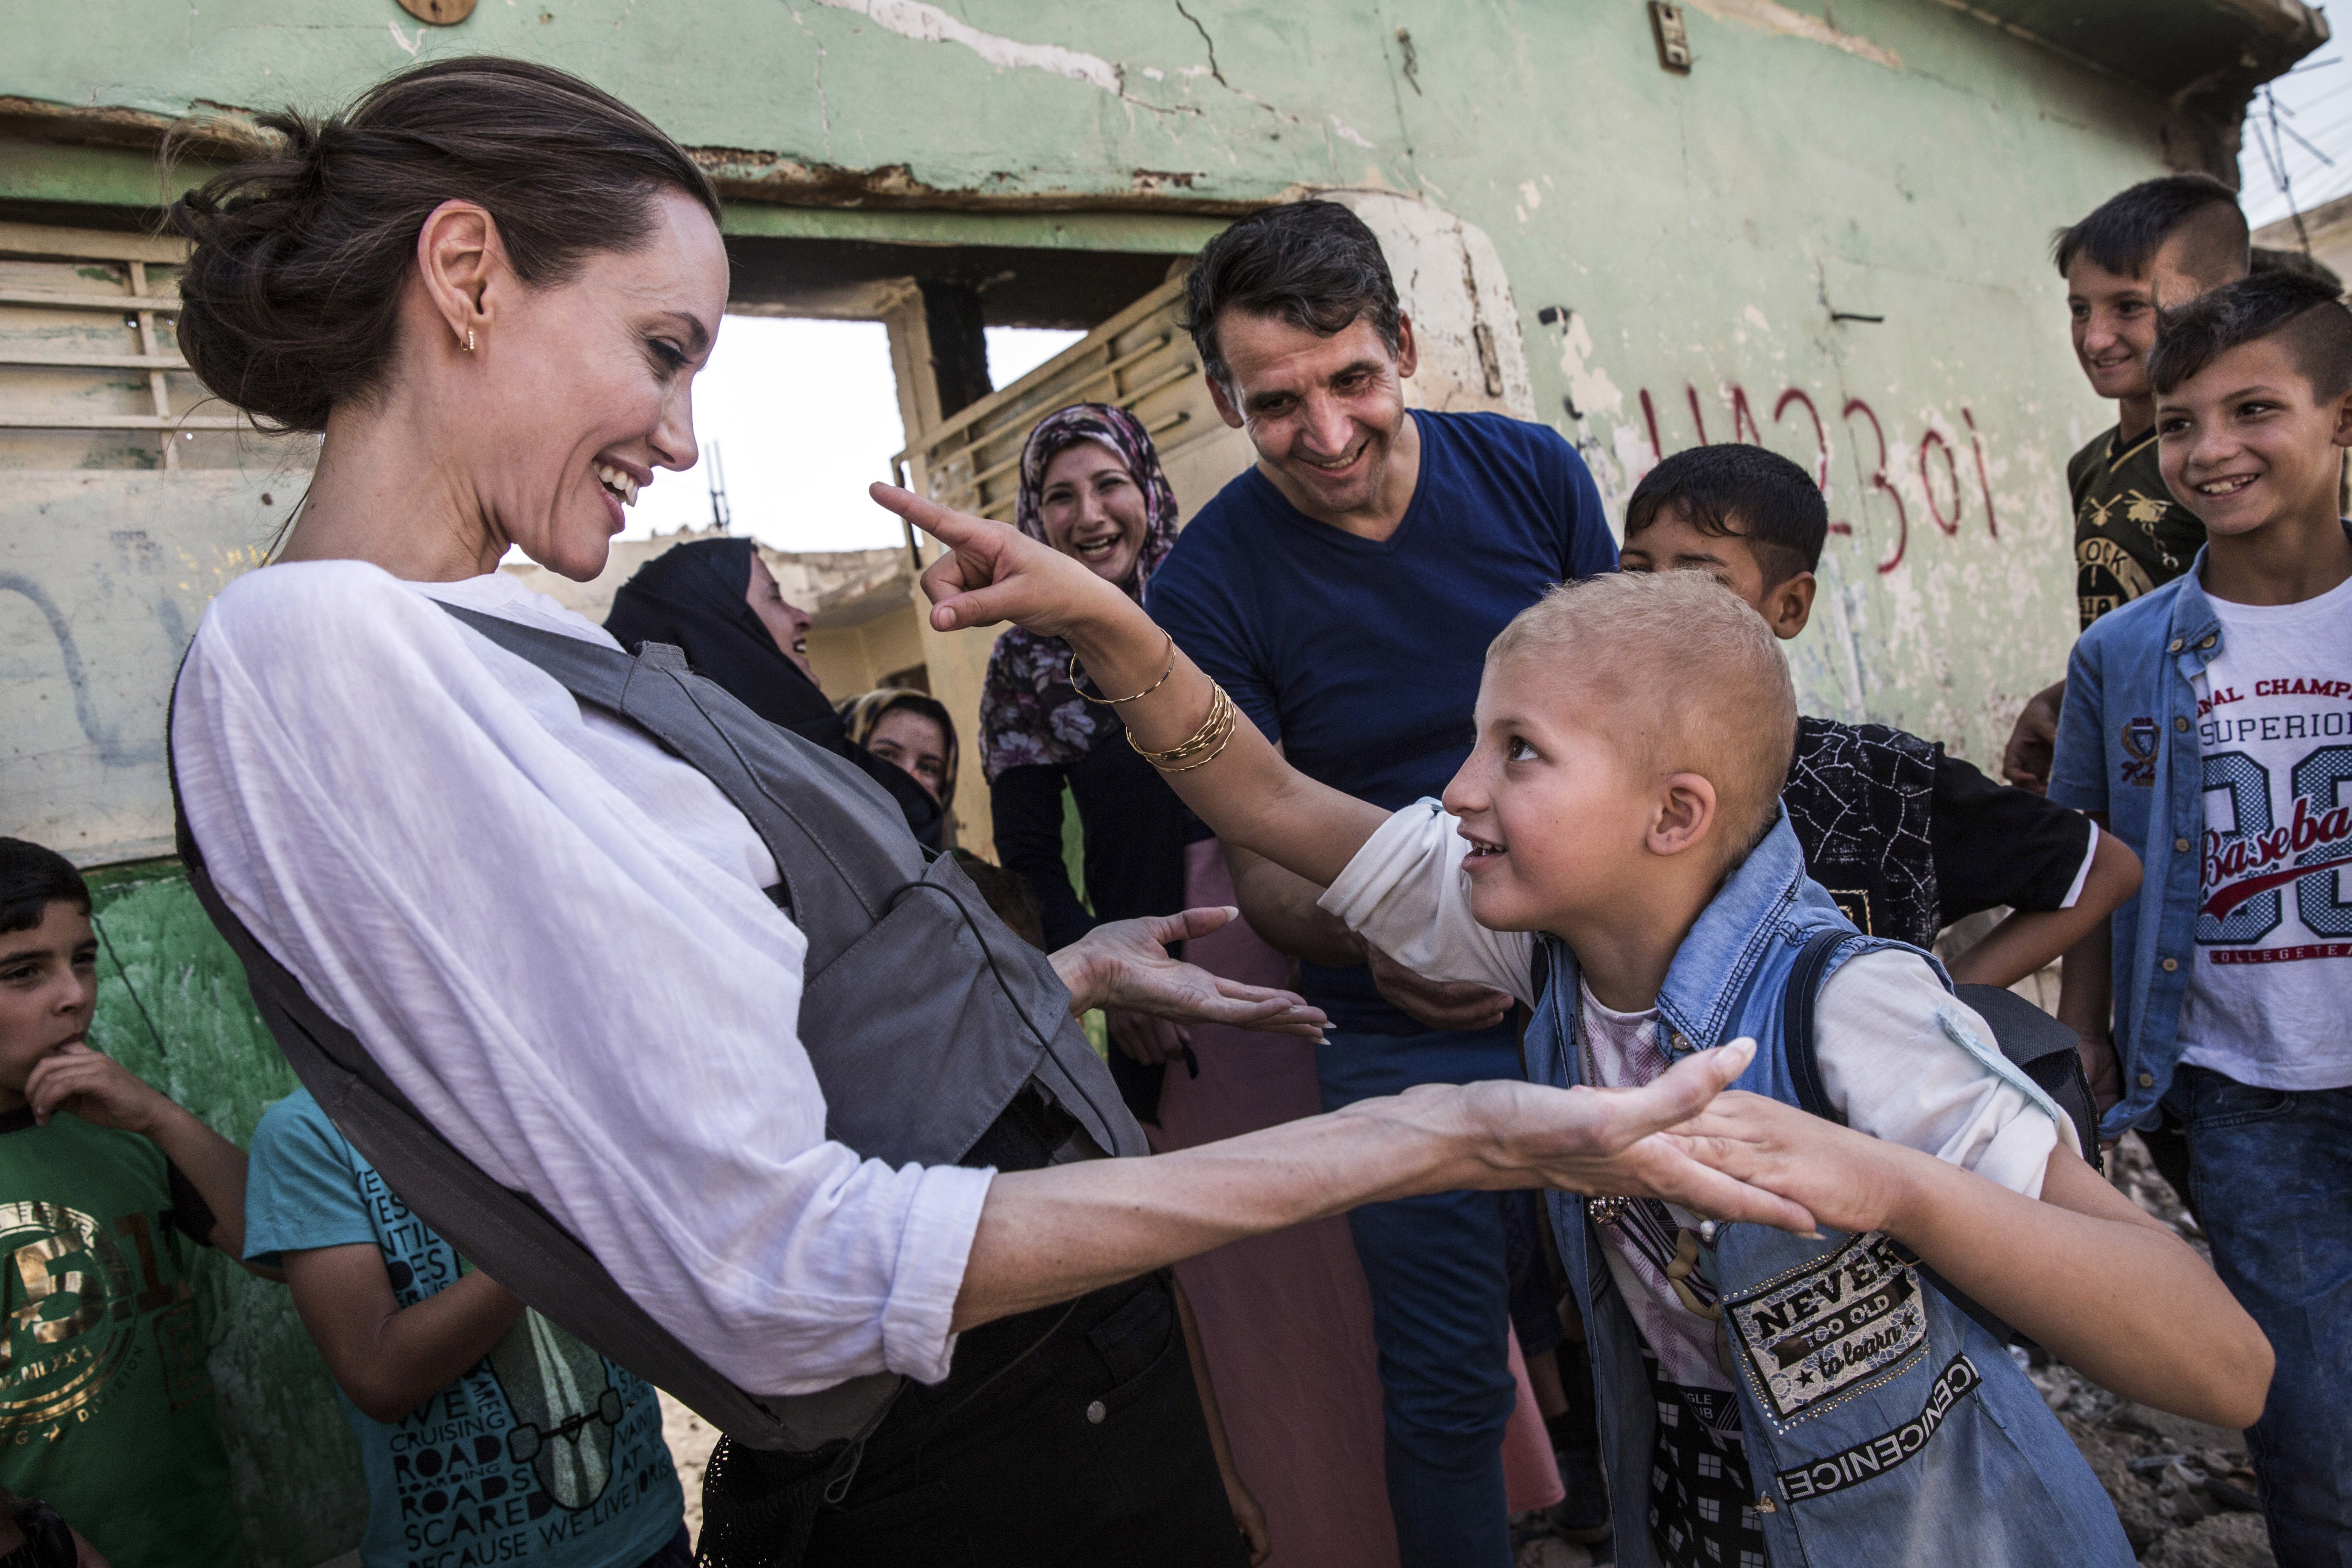 Angelina Jolie meets Falak, 8, during a visit to West Mosul during a visit to Iraq, on June 16, 2018. | Source: Getty Images